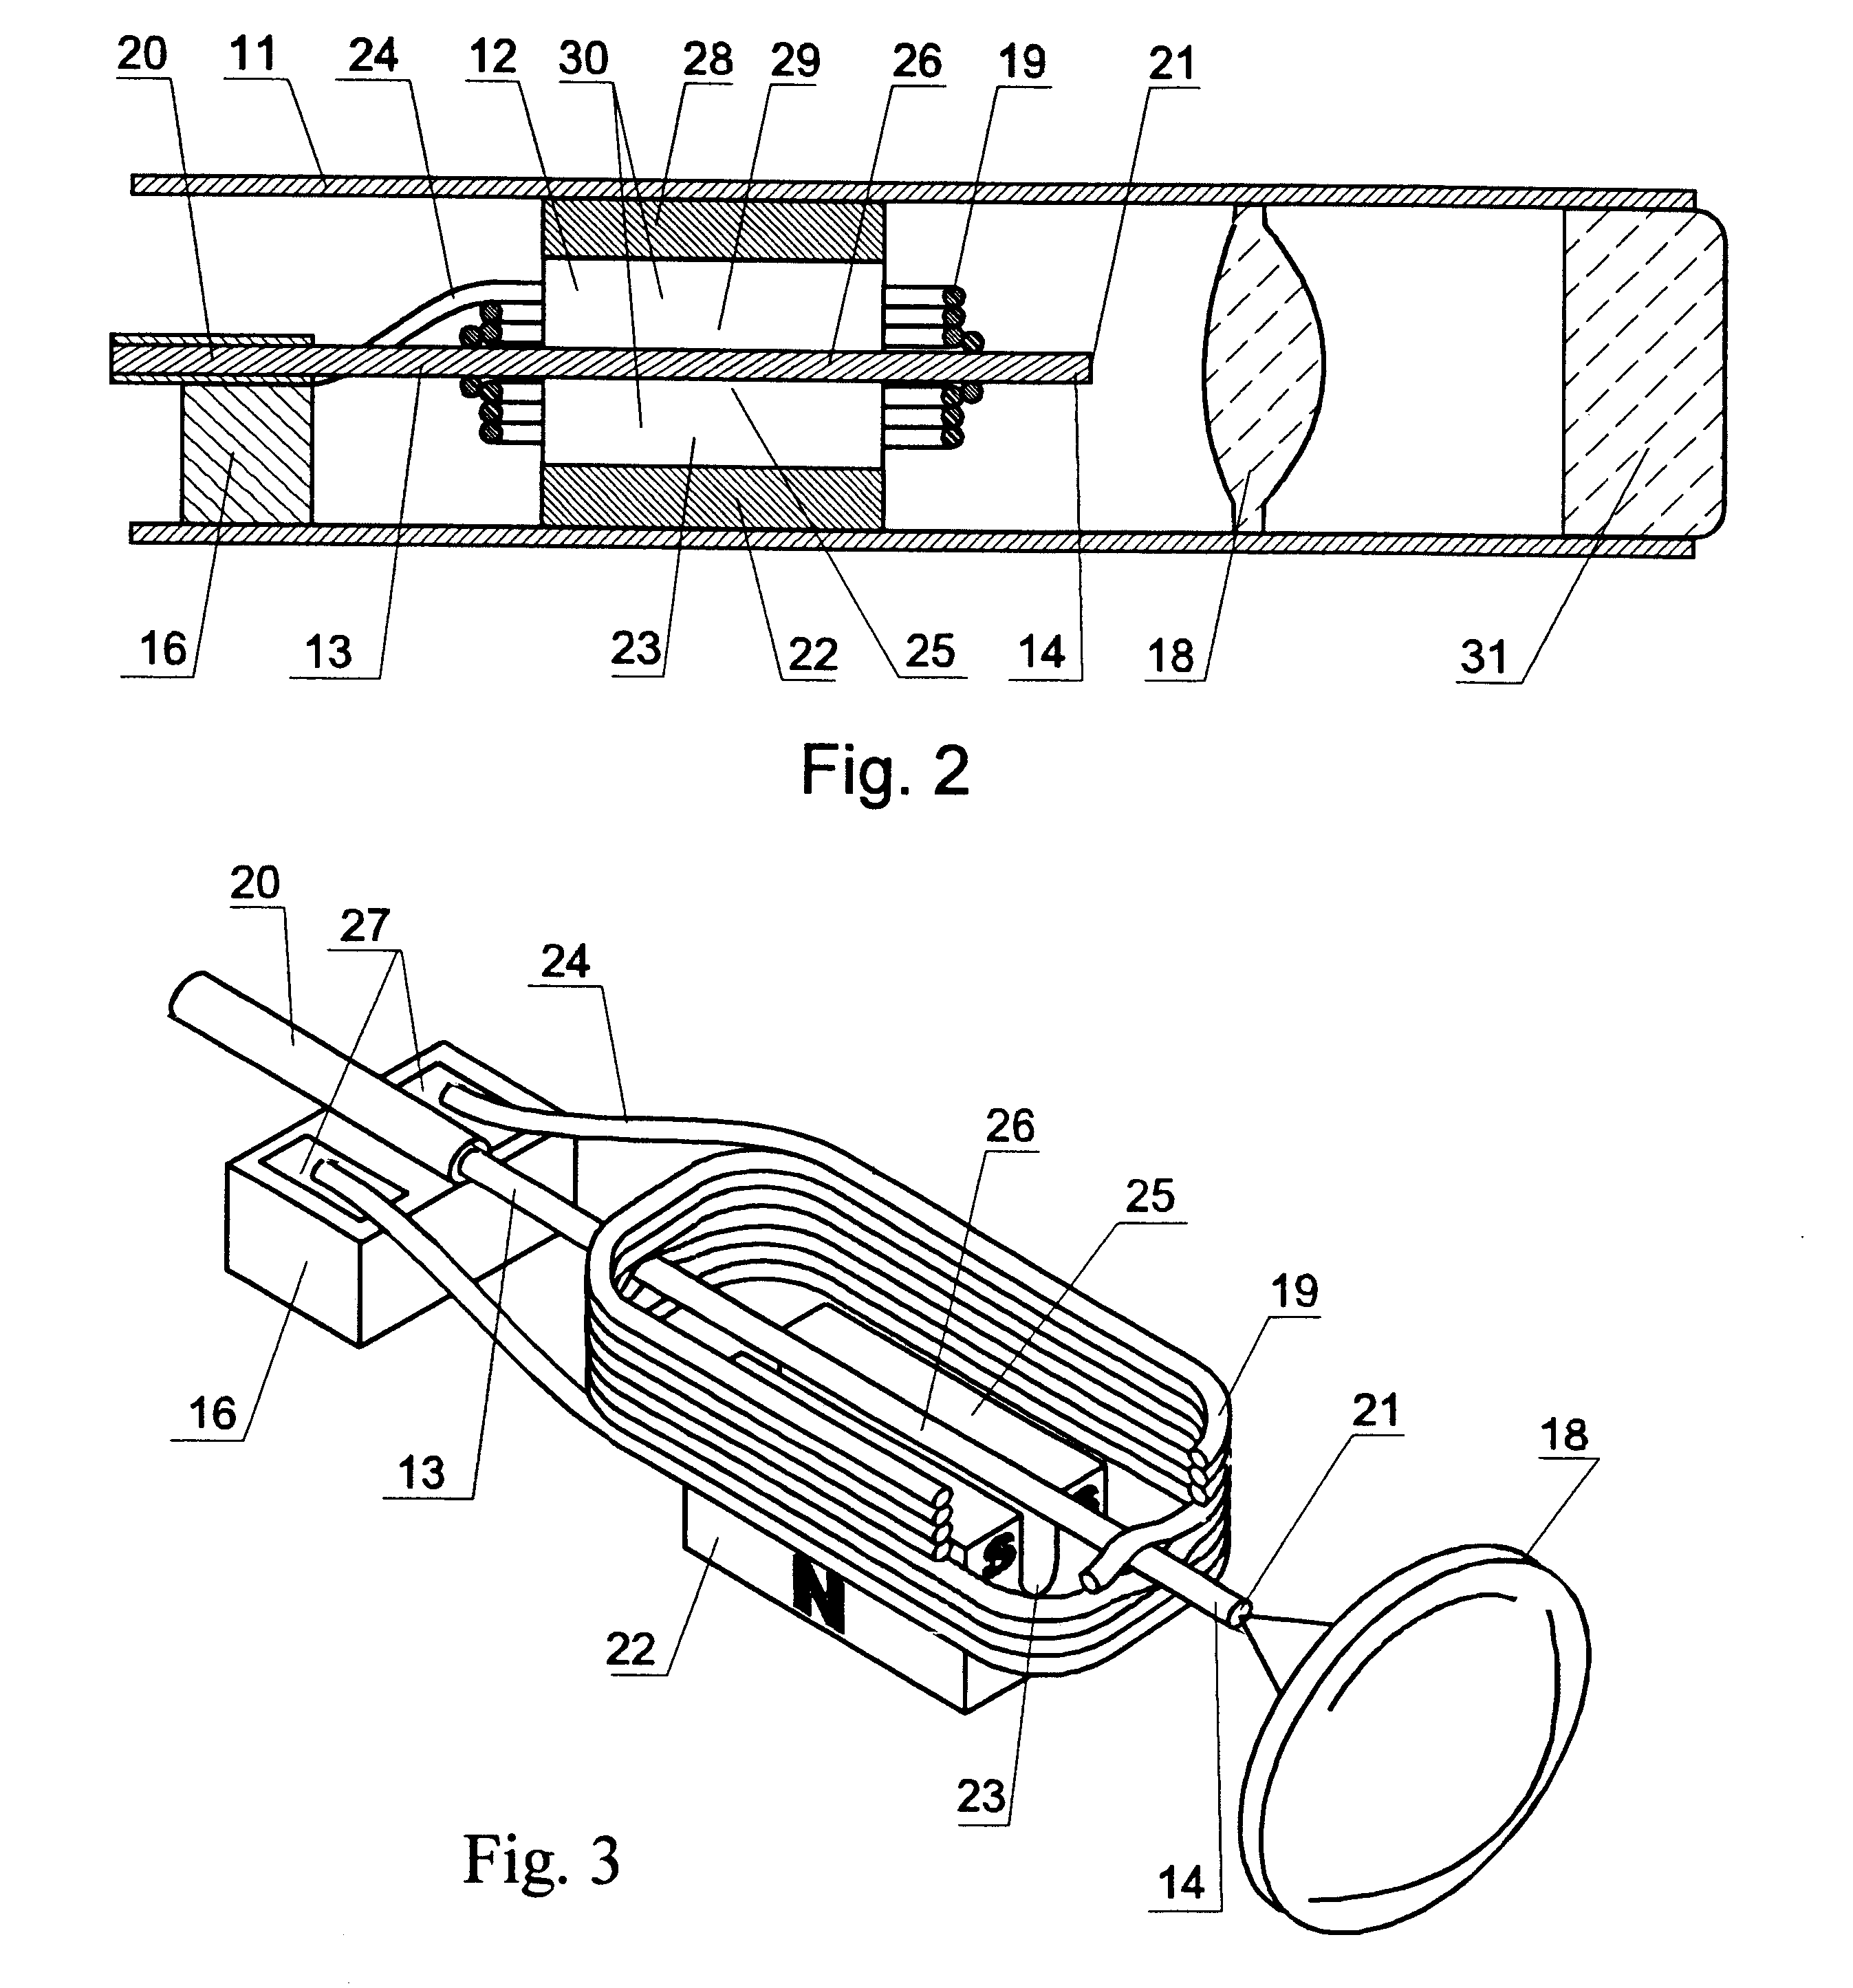 Optical coherence tomography apparatus, optical fiber lateral scanner and method for studying biological tissues in vivo